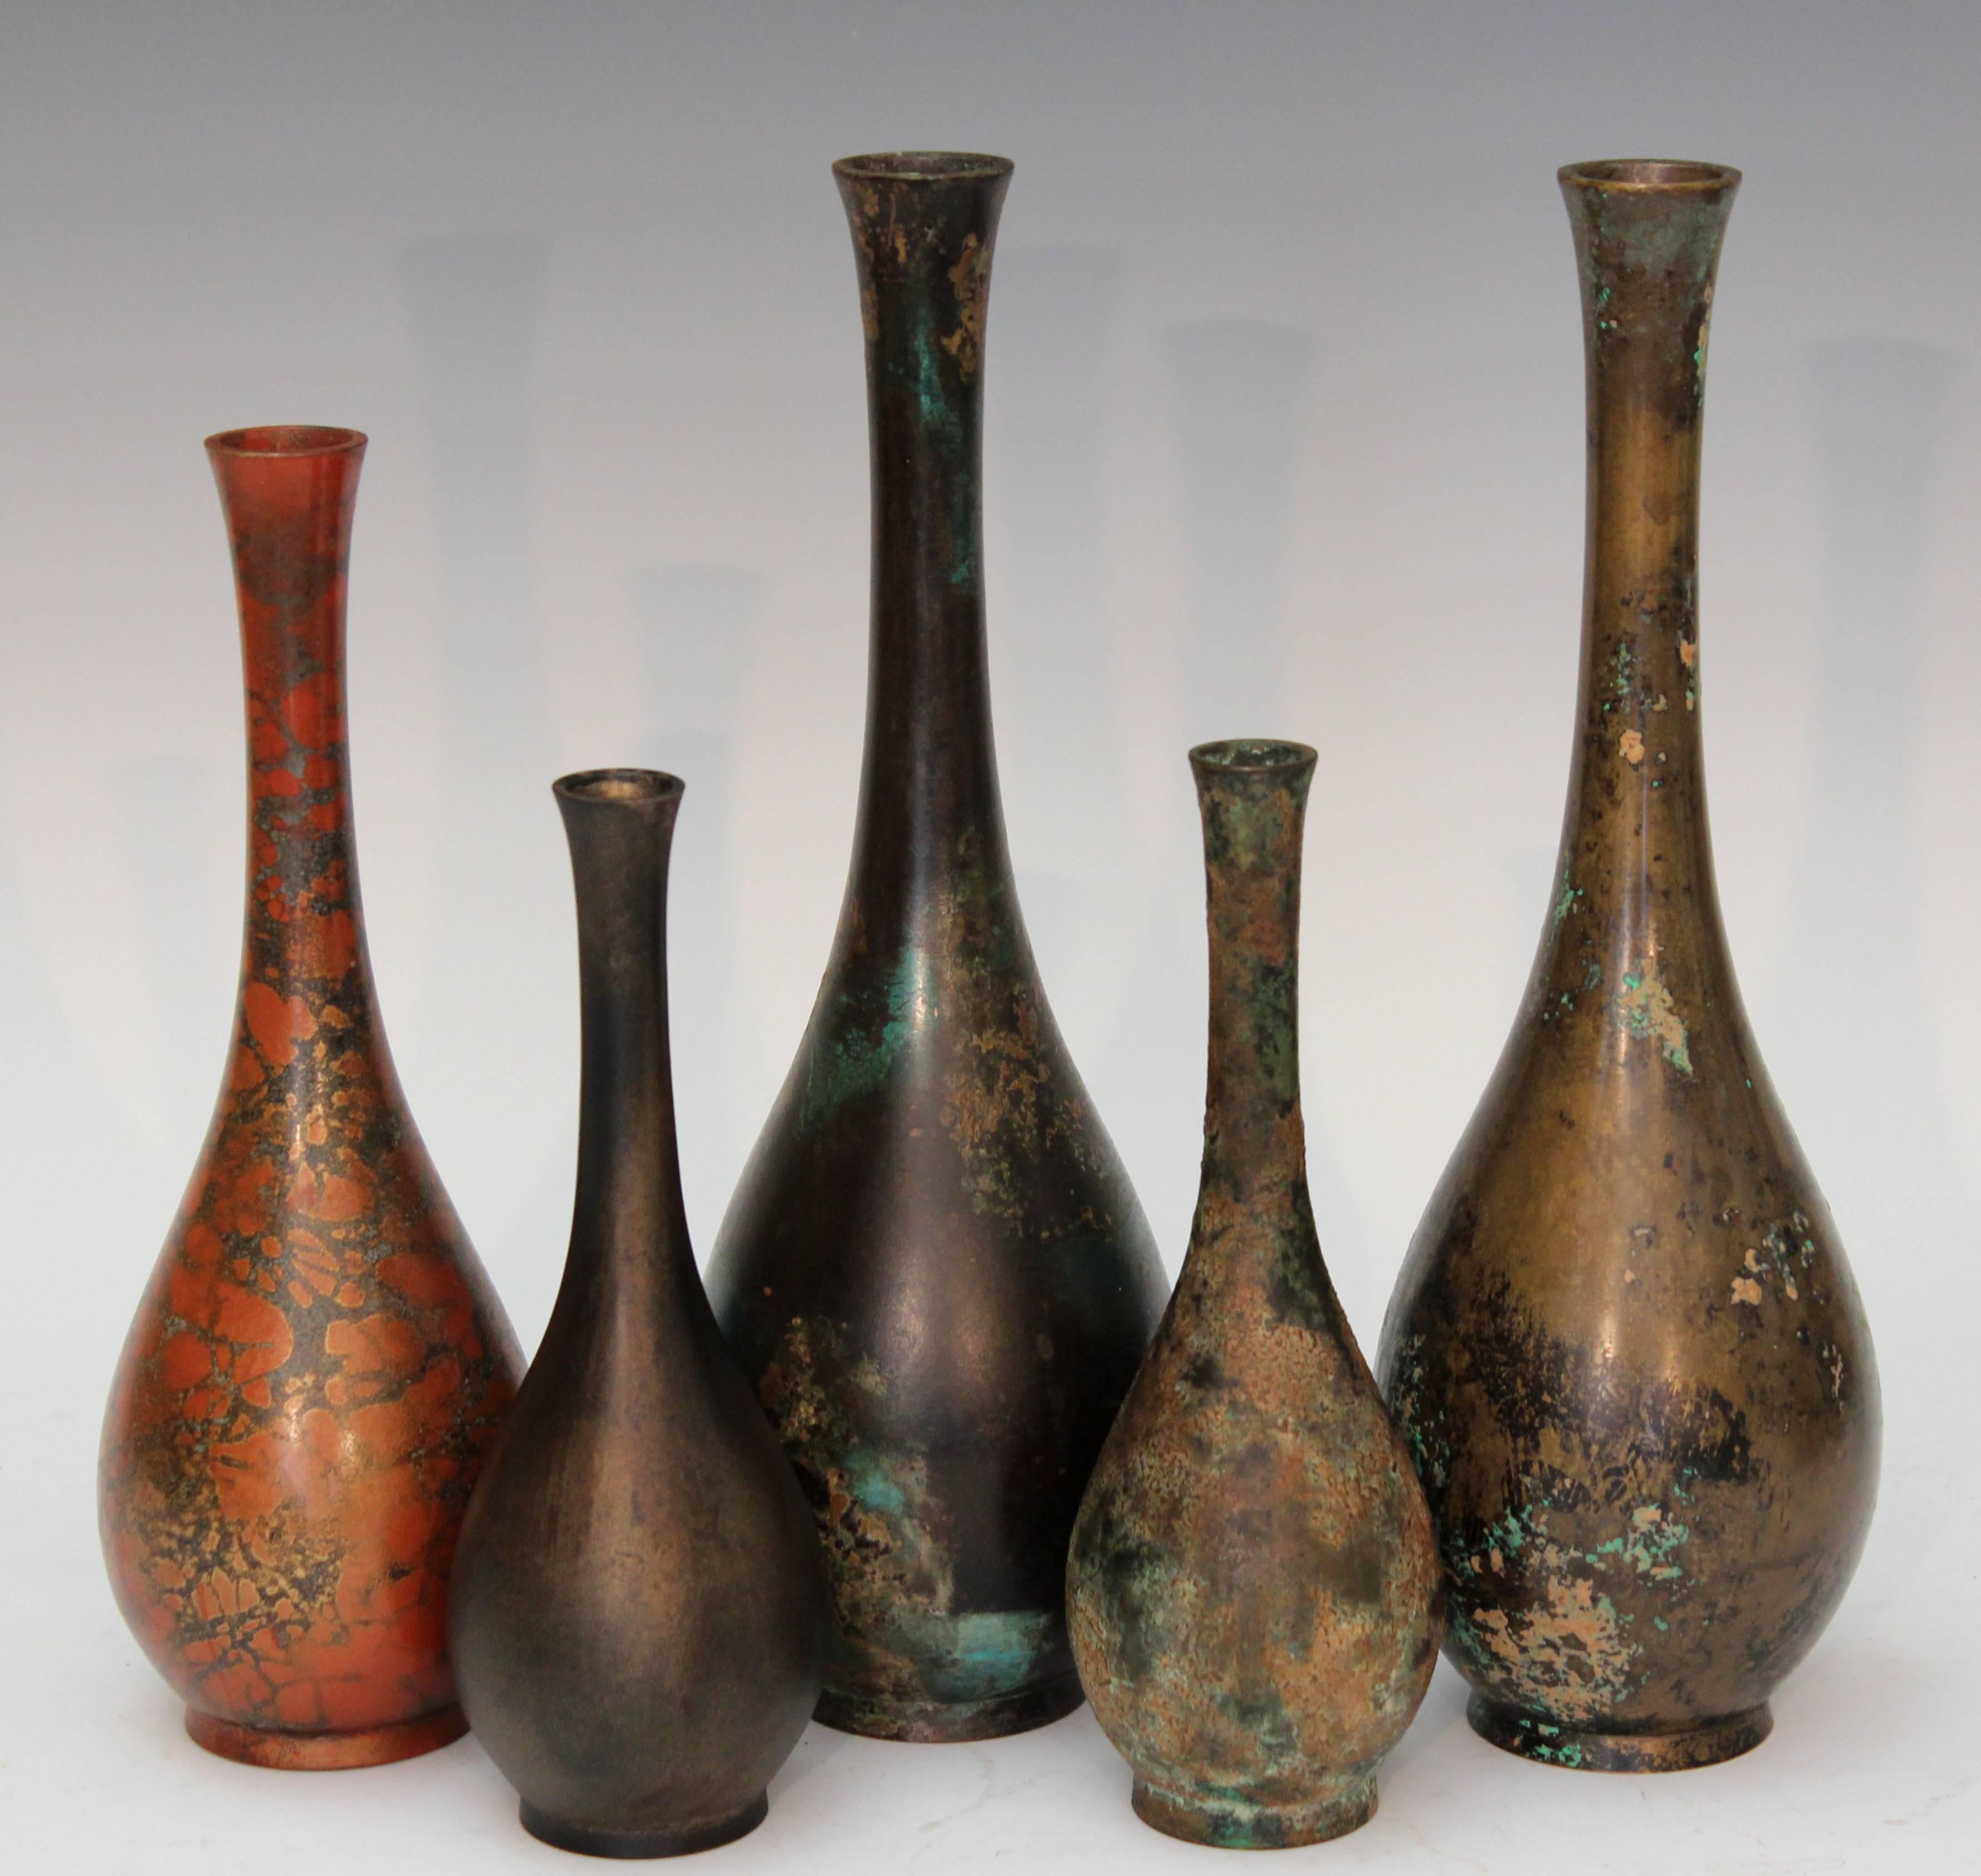 20th Century Collection of Five Vintage Japanese Patinated Bronze Bottle Vases